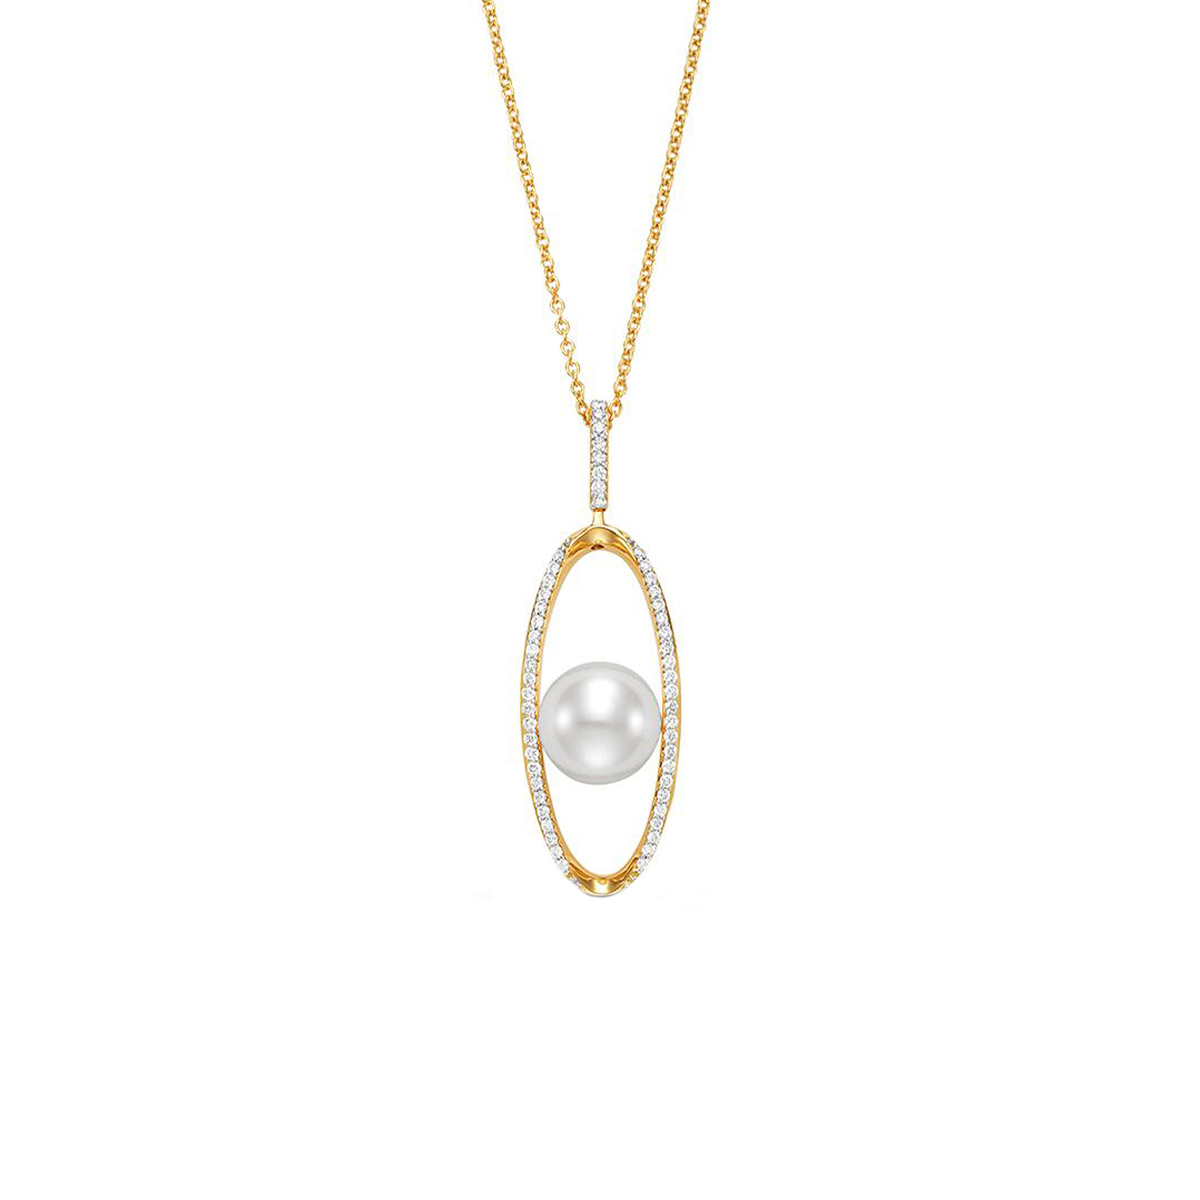 18K Yellow Gold Freshwater Pearl and Diamond Pendant with Chain